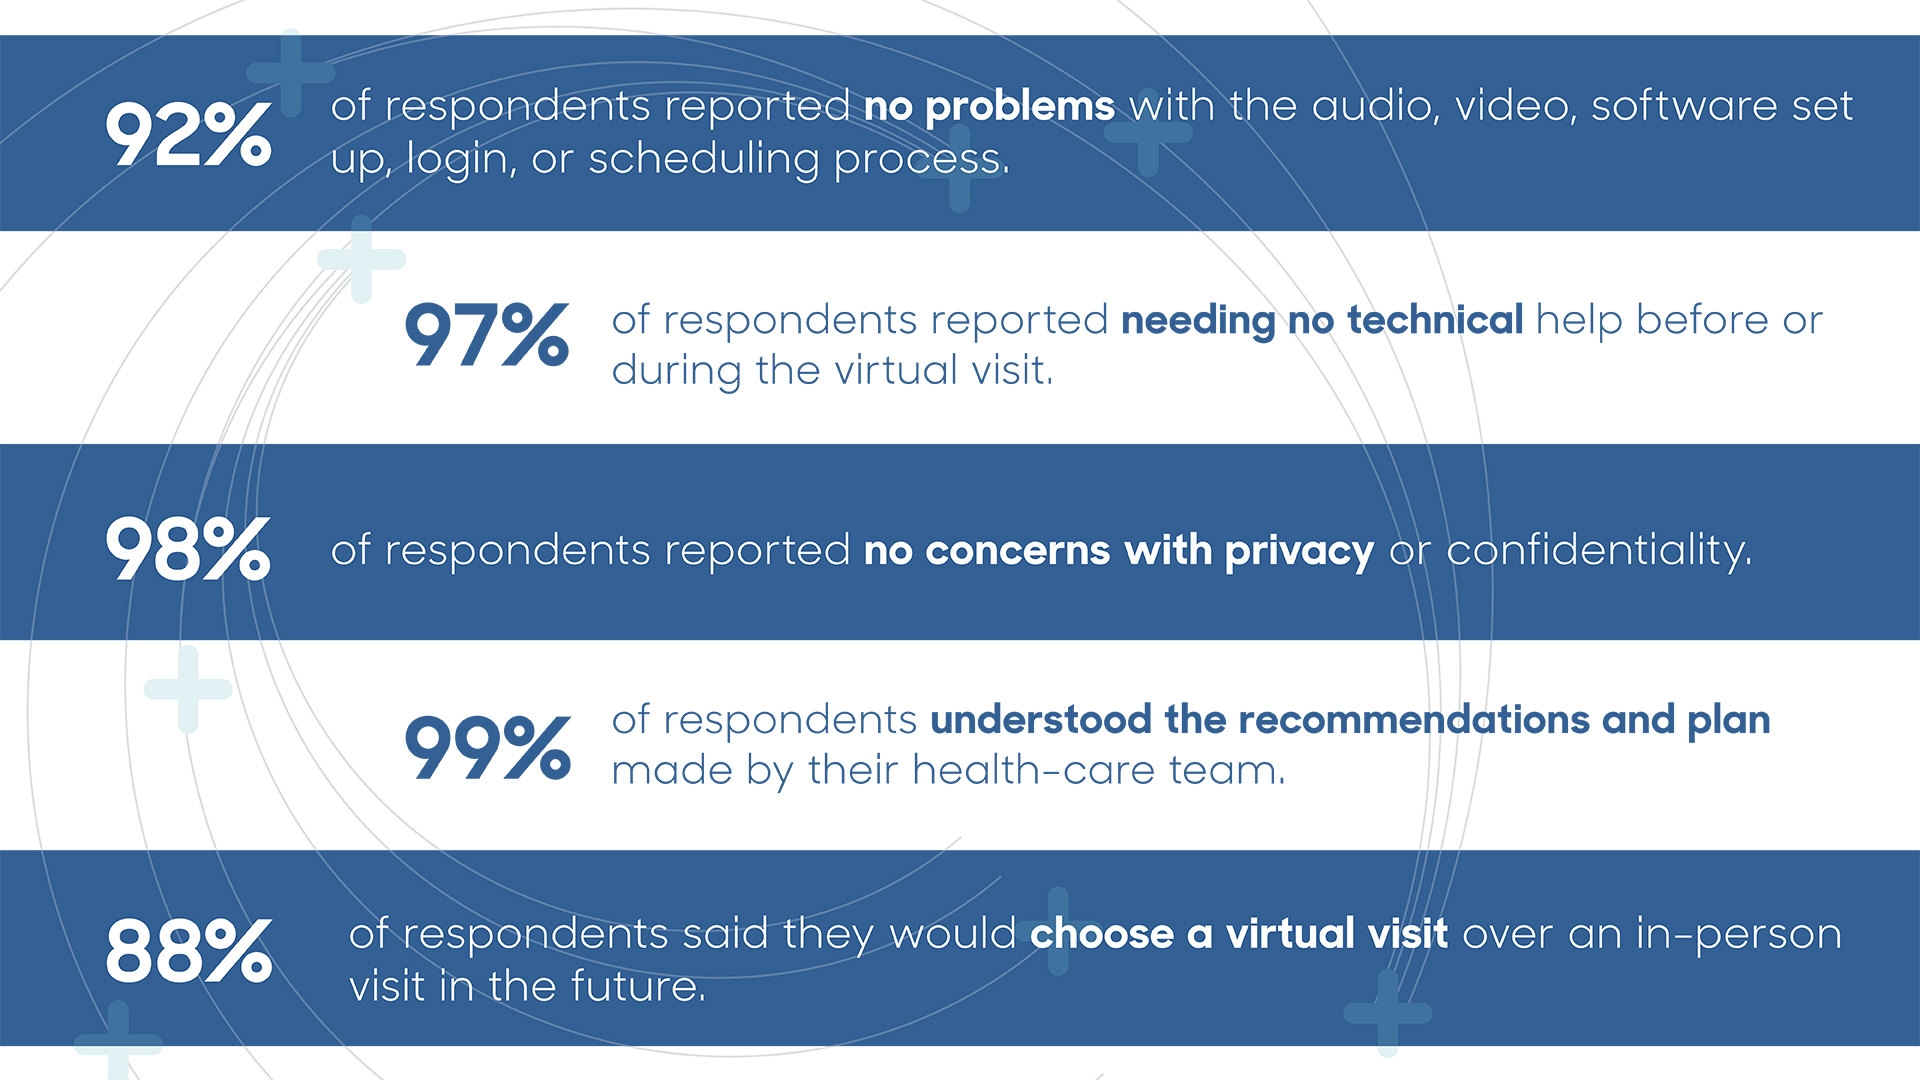 92% of respondents reported no problems with the audio, video, software set up, login, or scheduling process. 97% of respondents reported needing no technical help before or during the virtual visit.  98% of respondents reported no concerns with privacy or confidentiality.  99% of respondents understood the recommendations and plan made by their health-care team.  88% of respondents said they would choose a virtual visit over an in-person visit in the future.